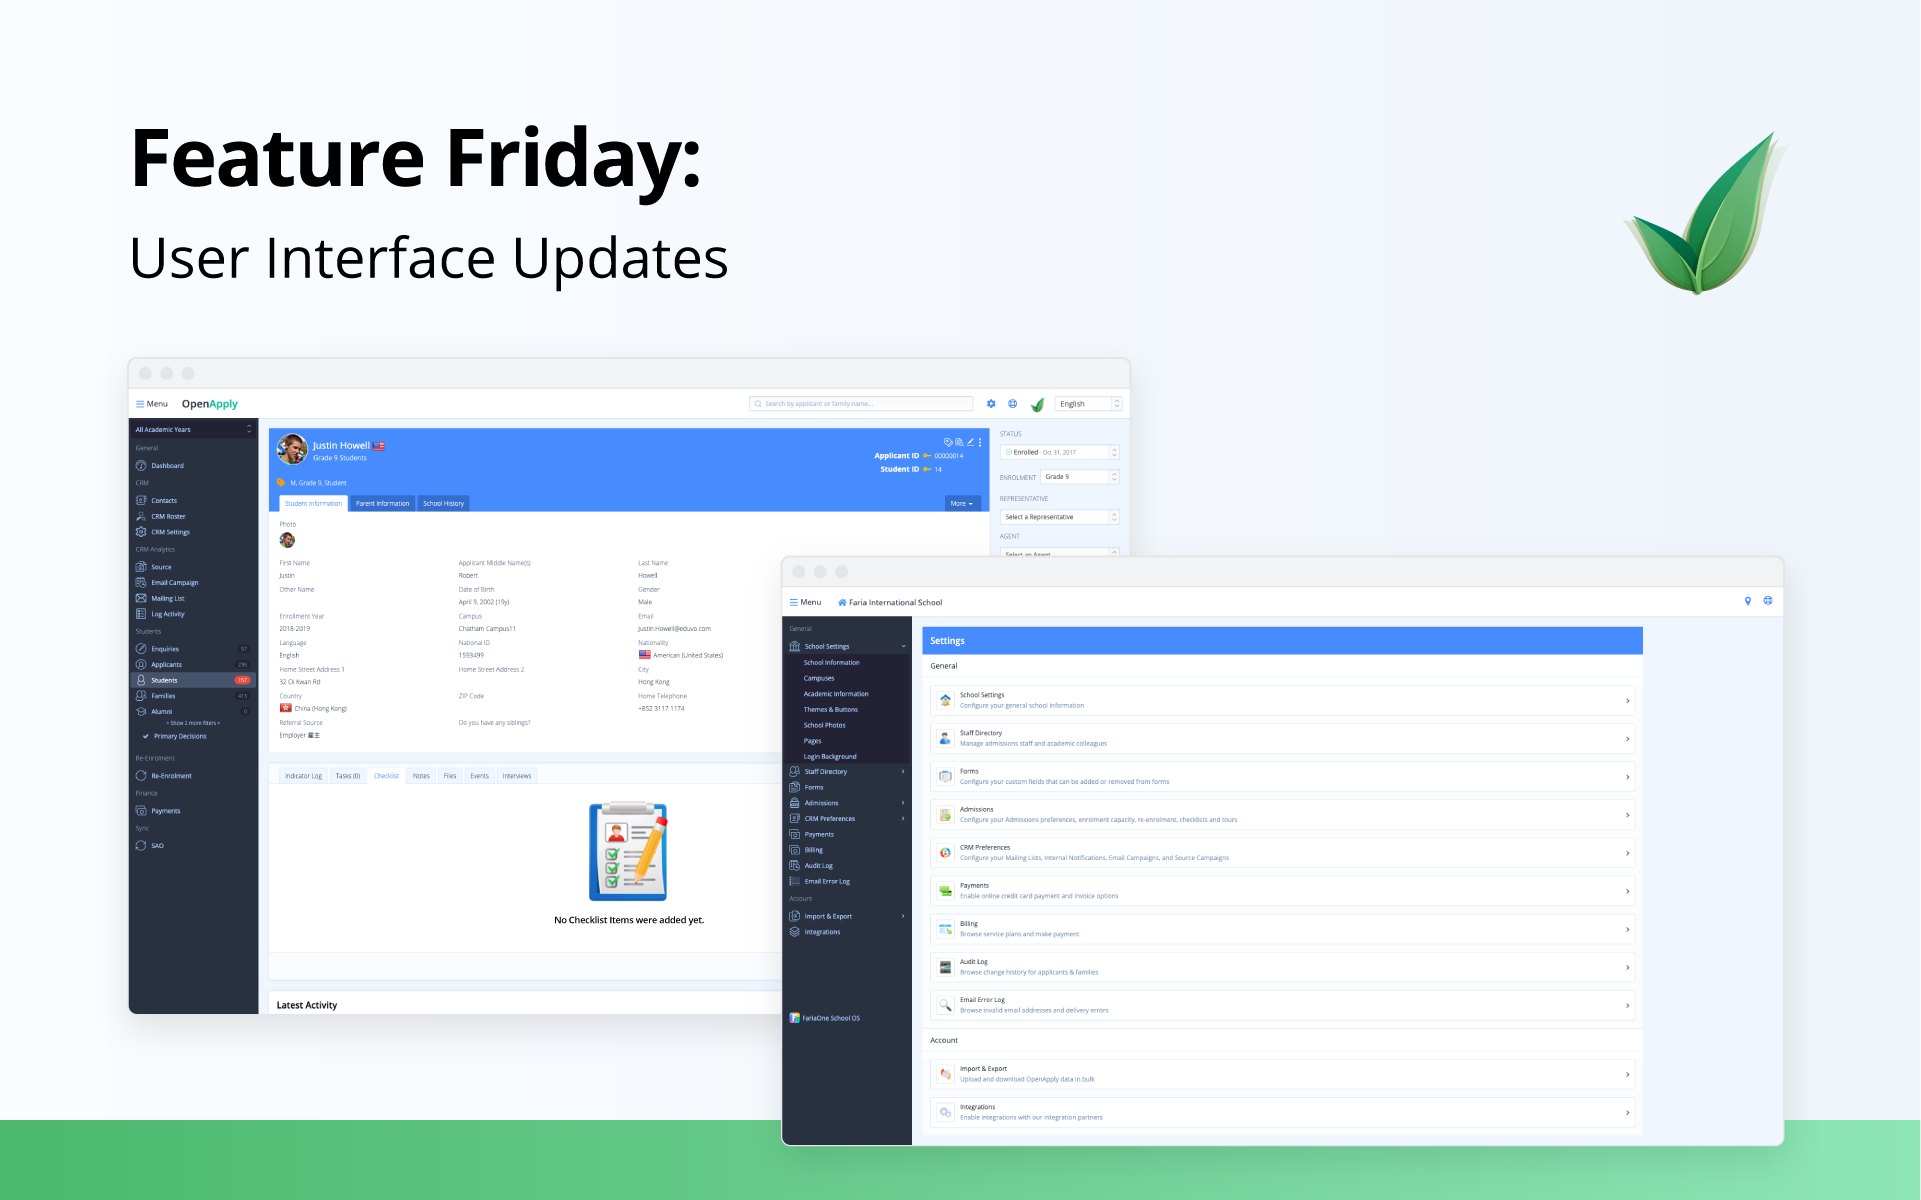 Feature Friday: User Interface Updates